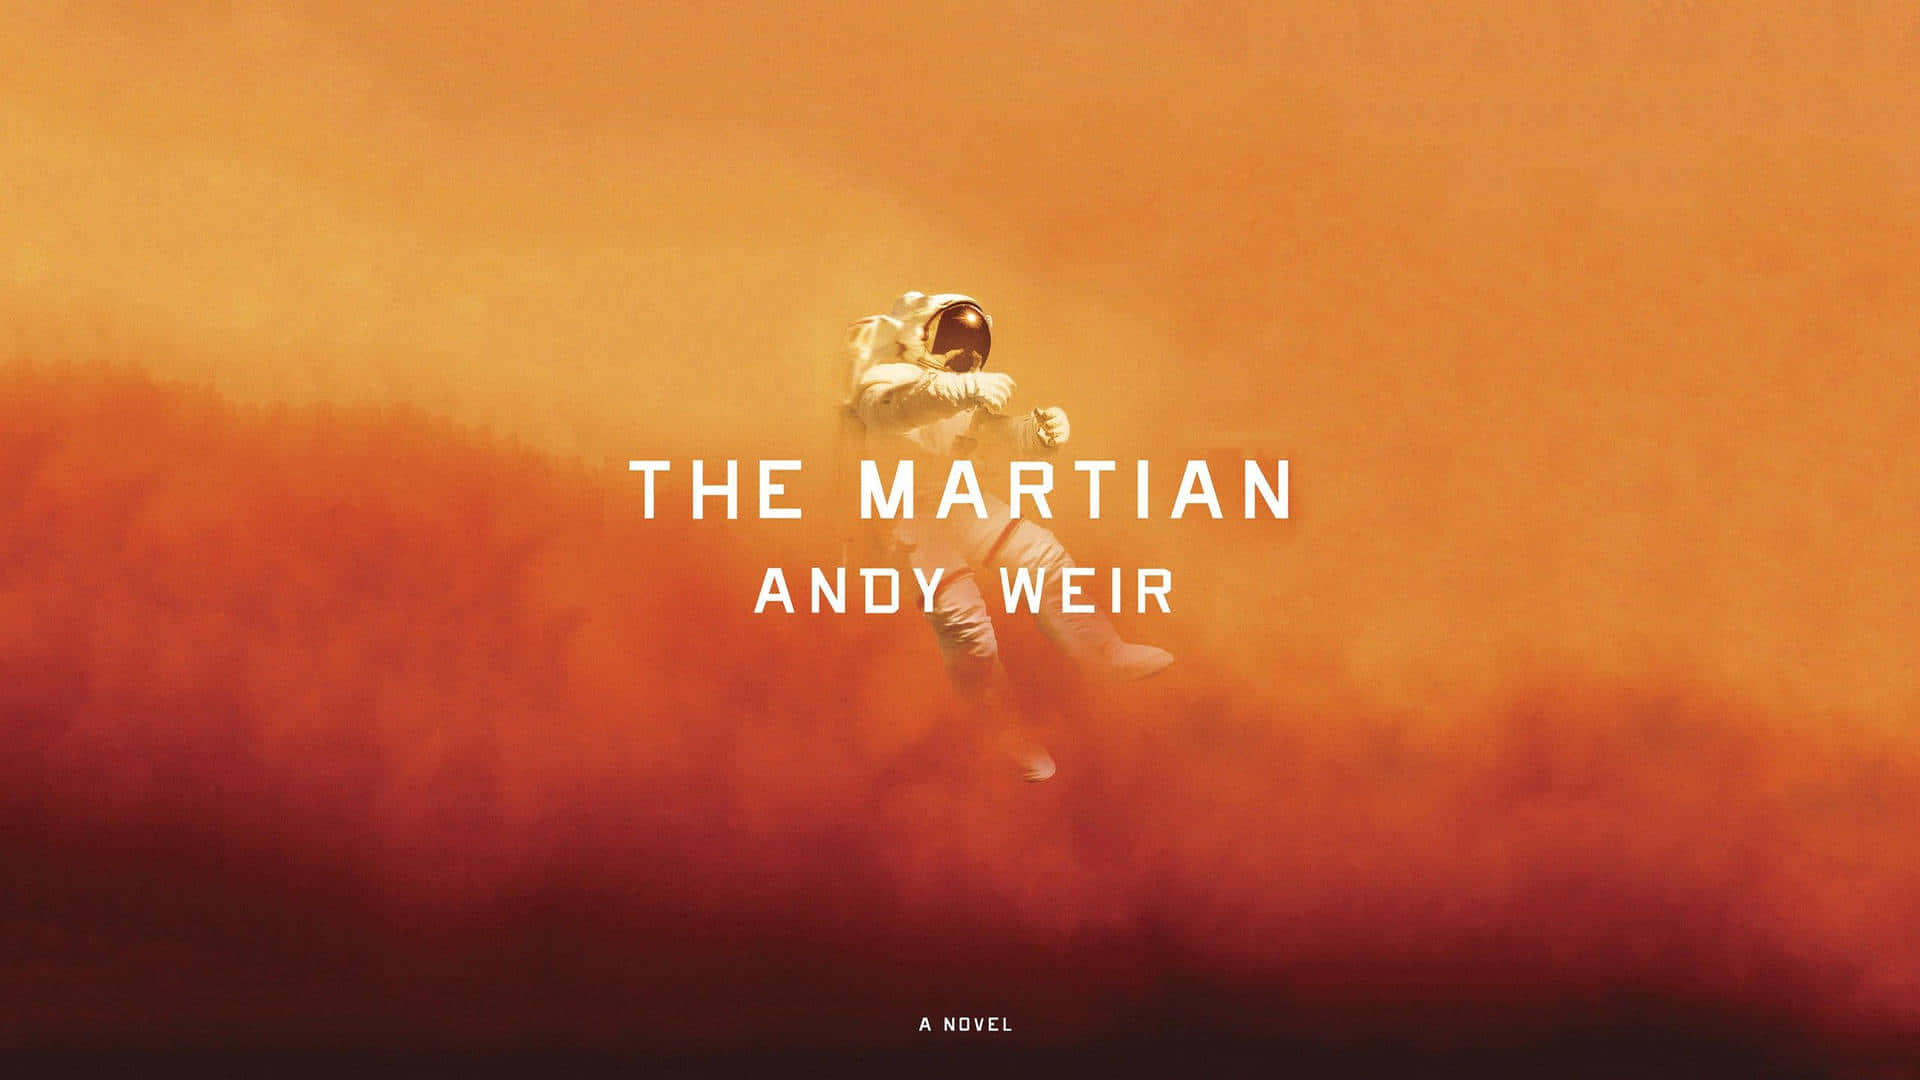 Ilmarziano Di Andy Weir